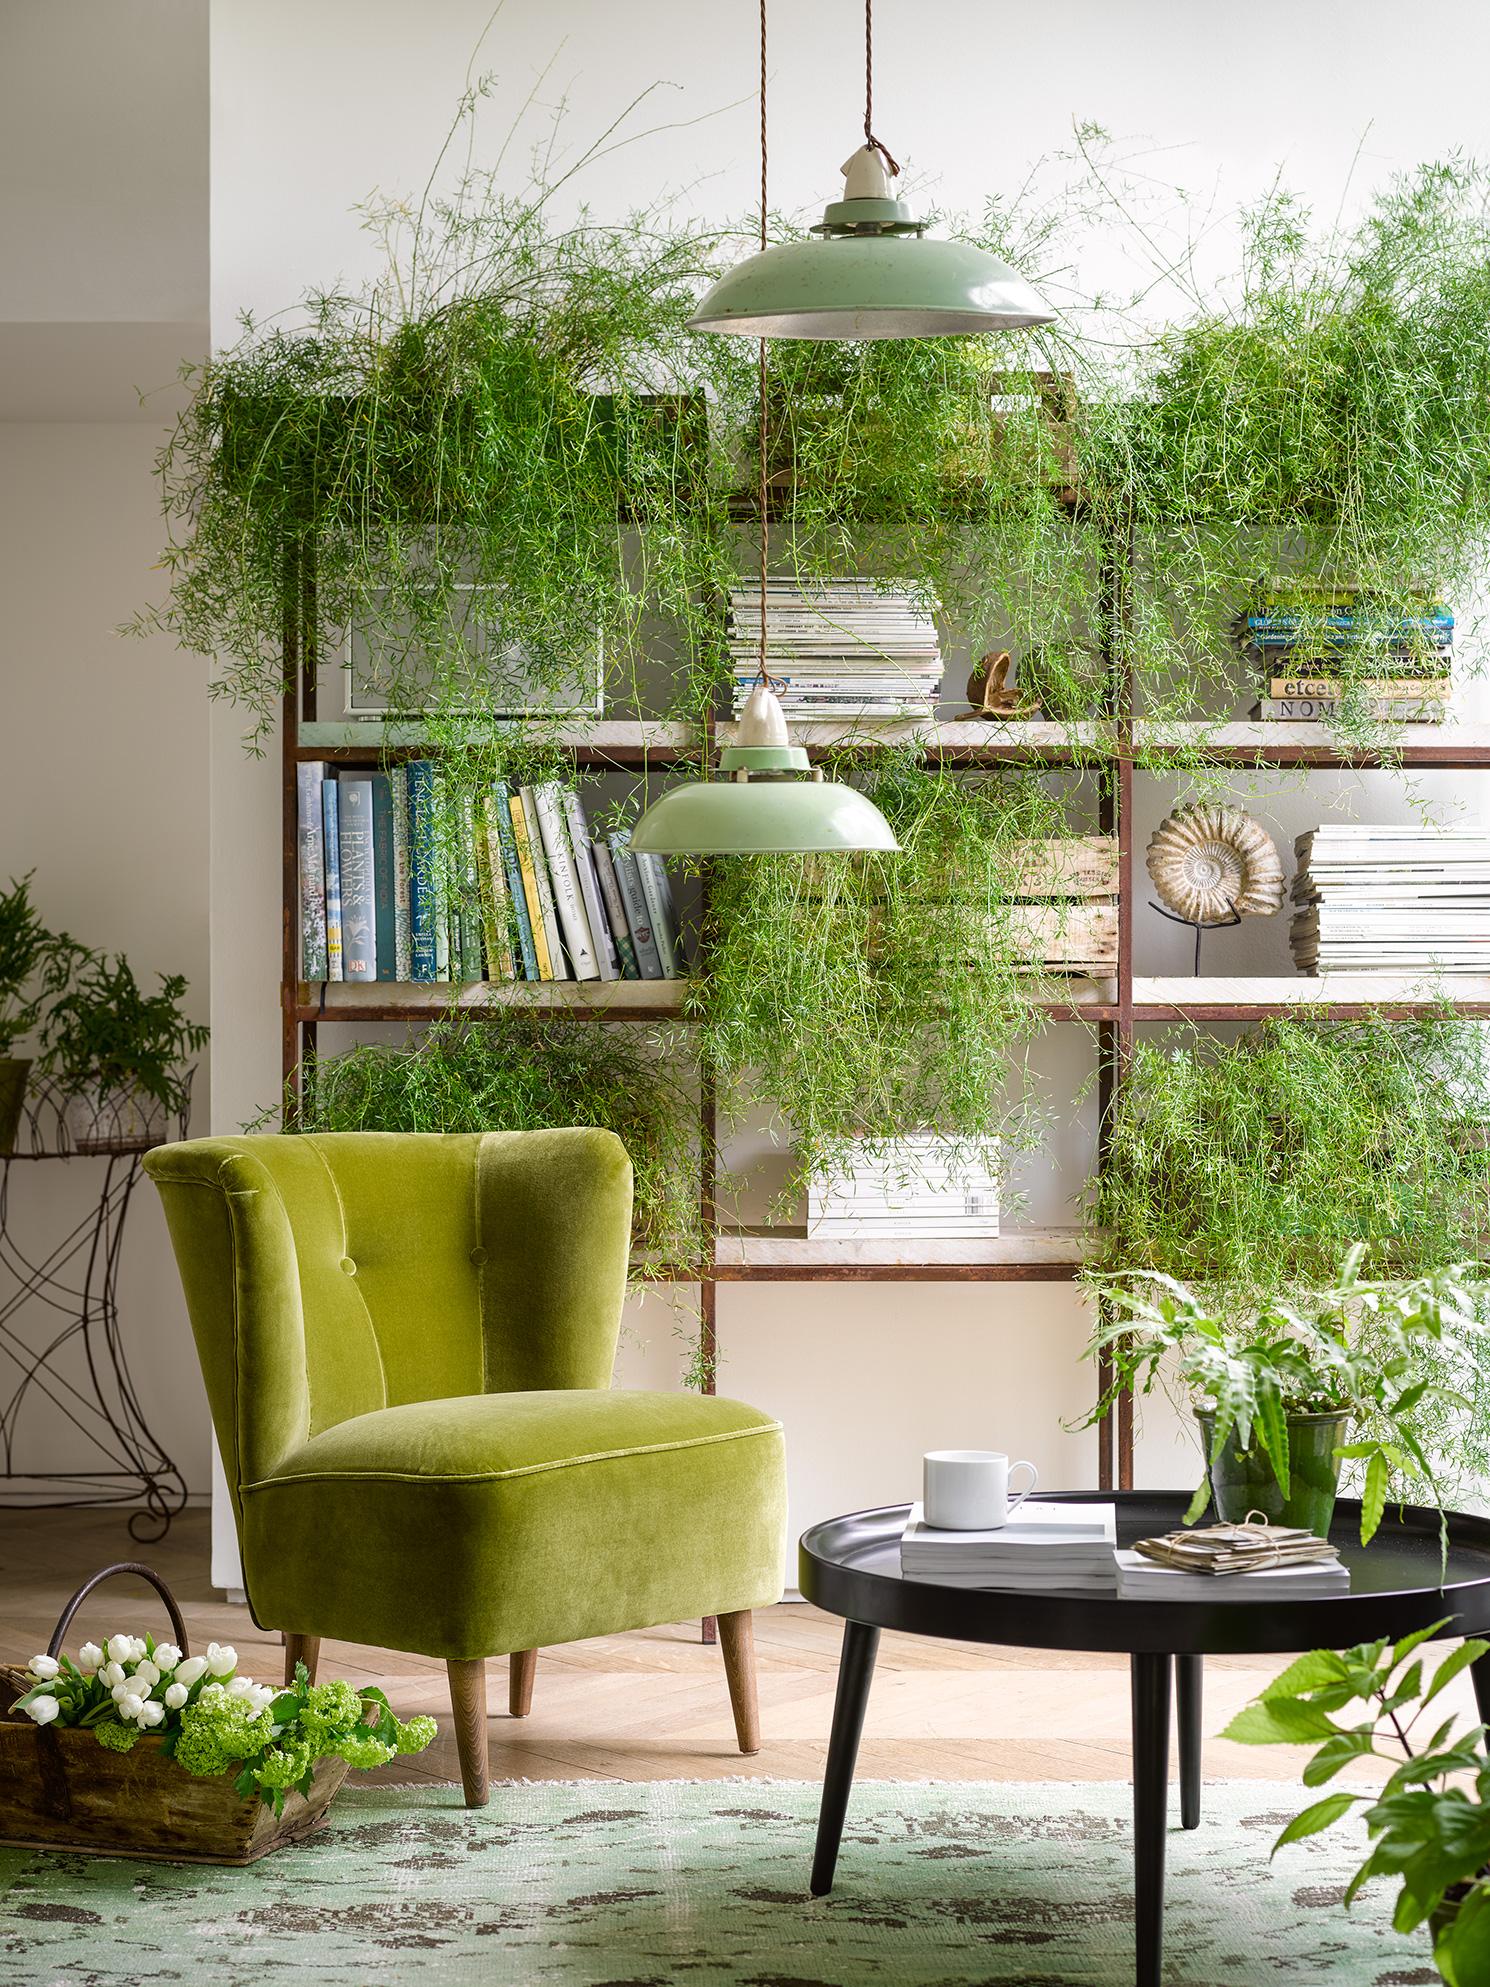 Natural Green Living Room Inspiration| Today we're talking inspiration for a green living room. Green is a really versatile colour to decorate your home with. But, which colours and tones work well? What kind of accessories work with green? This post gives you ideas for pulling together an elegant green colour palette and pieces for your home. Read more: kittyandb.com #greenlivingroom #greencolorpalette #interiordecoratinginspiration #greenaesthetic #plants